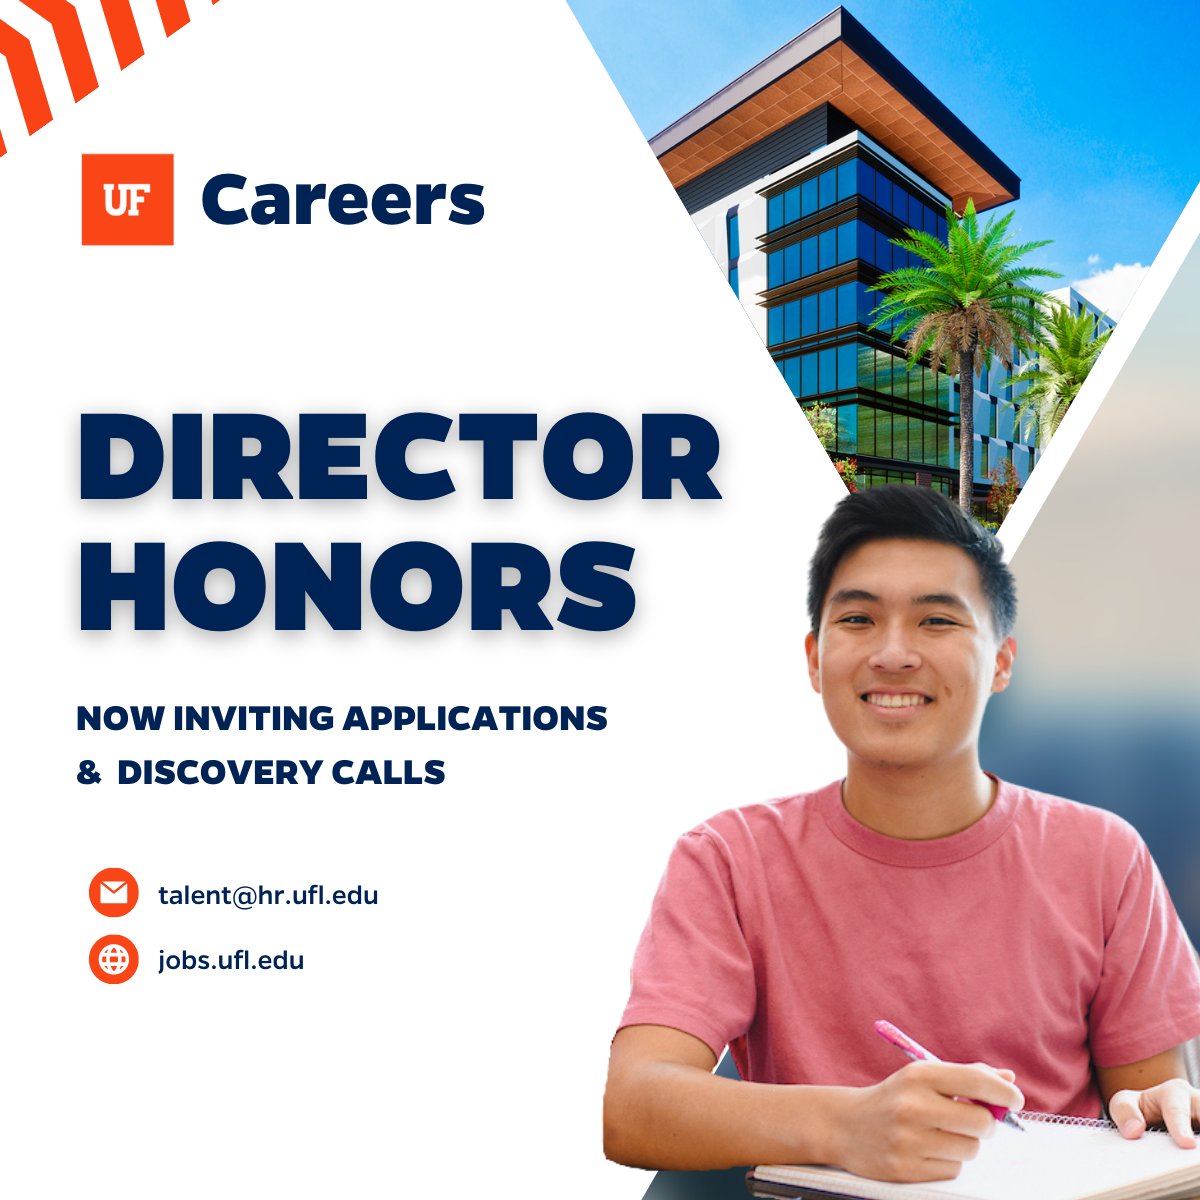 The Office of Undergraduate Affairs invites applications, nominations, and discovery calls for the Director of the UF Honors Program opportunity.

Email us to learn more!

LEARN MORE: explore.jobs.ufl.edu/en-us/job/5251… 

#honorsprogram #honorscollege #undergraduateaffairs #NACADA #APLU